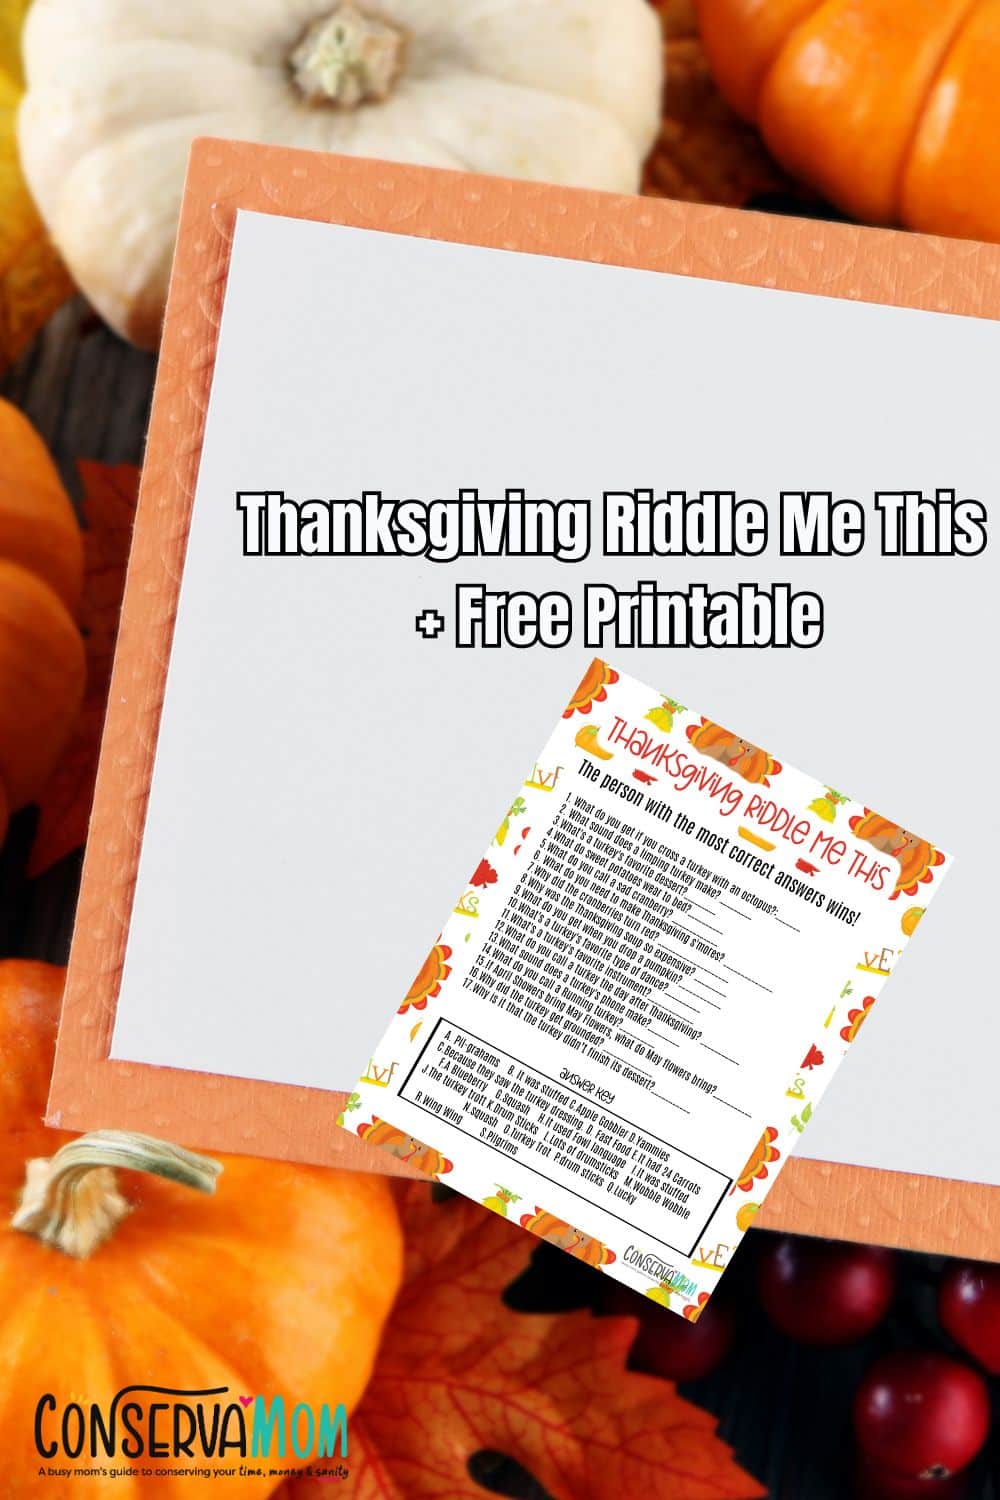 Thanksgiving Riddle Me This Printable 